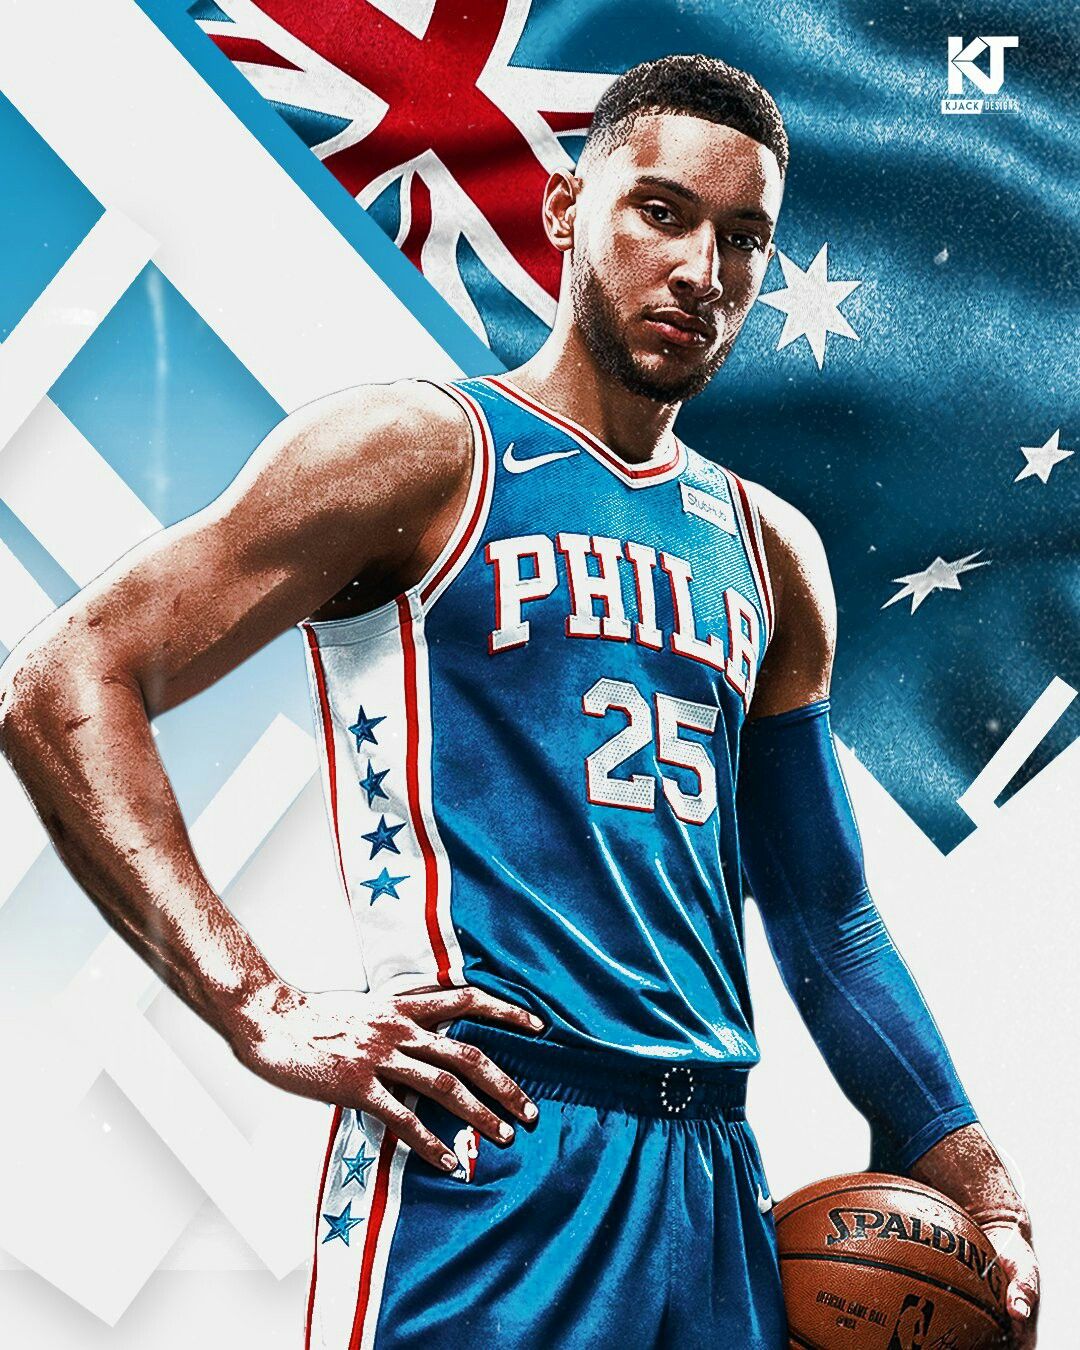 Jr NBA Asia  Download this FREE wallpaper of Joel Embiid and Ben Simmons  from the Philadelphia 76ers  HERE httpowly9dVD50ky4nJ Which  players would you like us to create for you next 